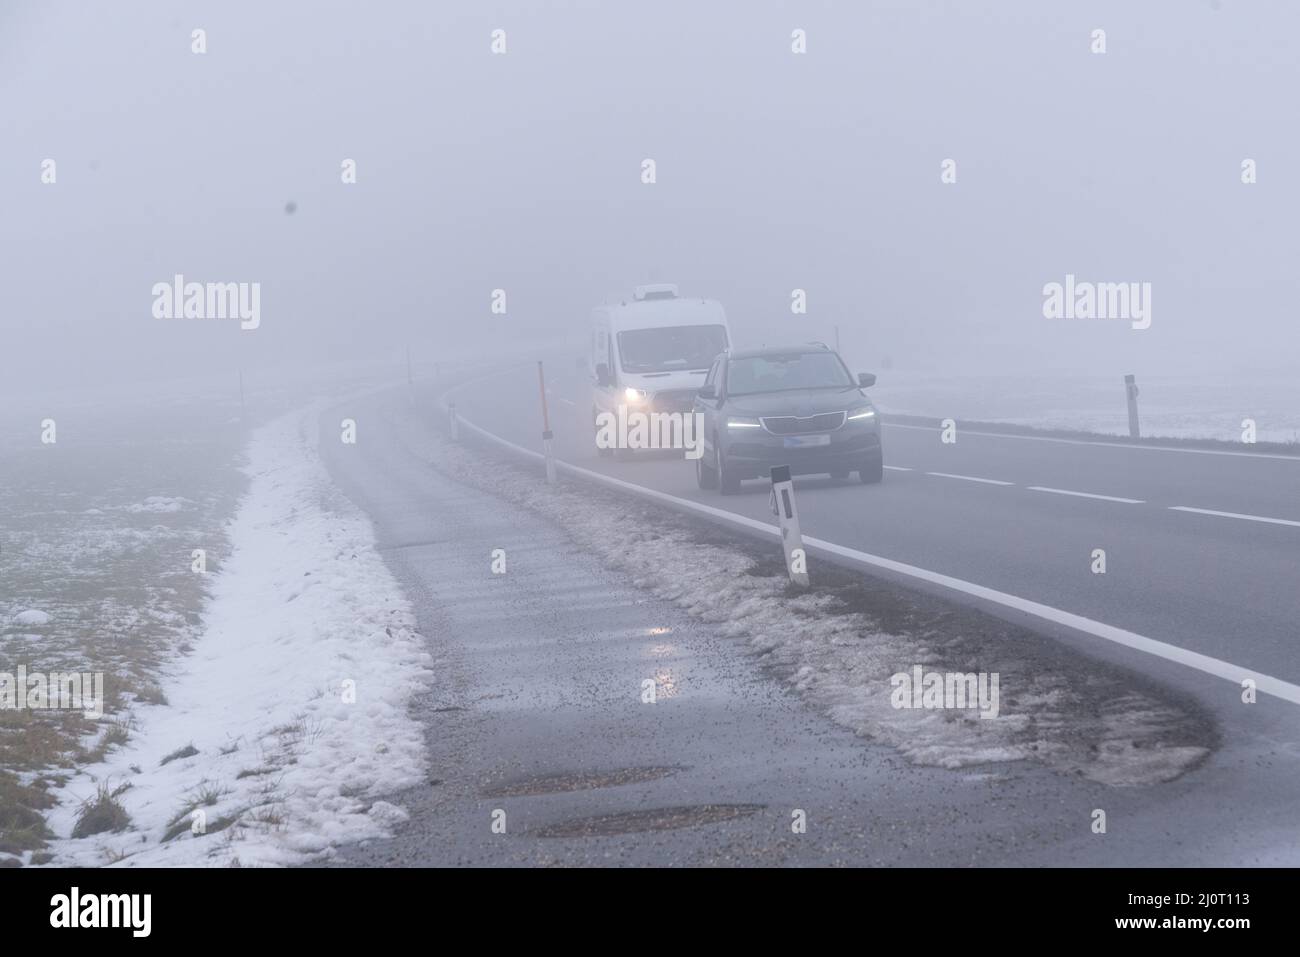 Bad driving conditions due to heavy fog - poor visibility Stock Photo